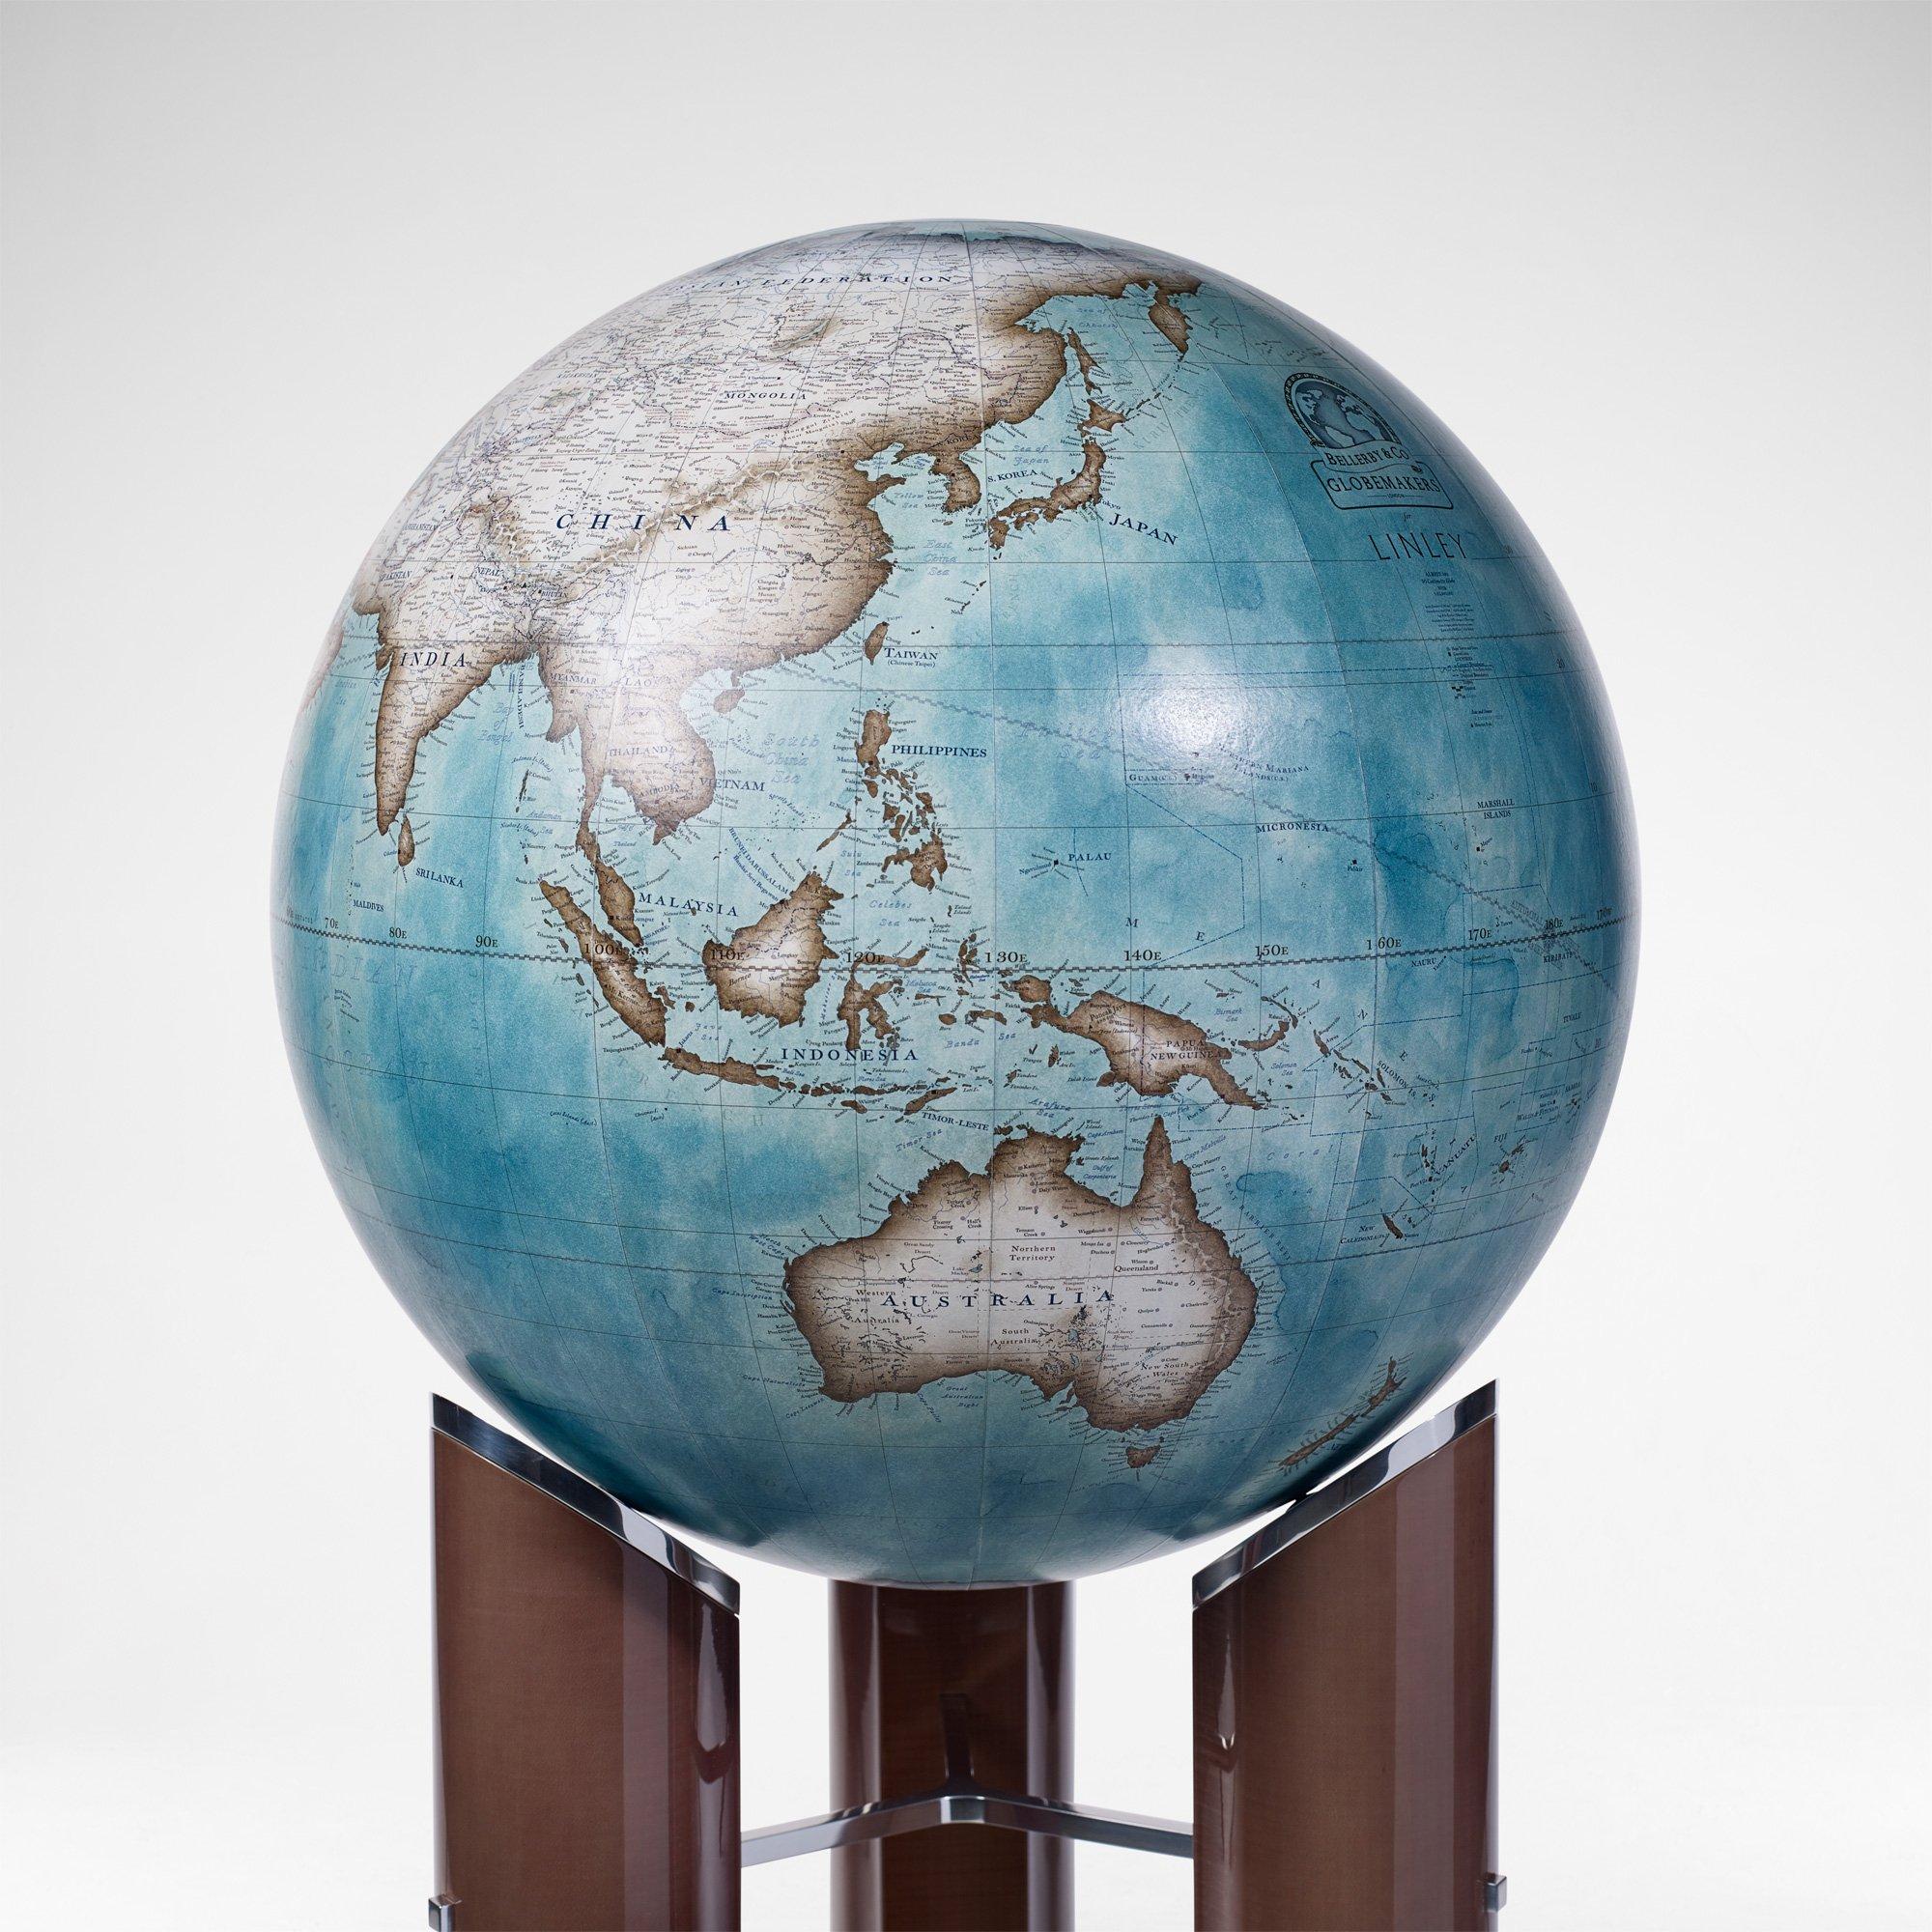 This striking piece features a 50cm diameter globe elevated on a sycamore dusk veneered stand with caps, brace detailing and a highly polished base in aluminium brass. The globe rests on three roller bearings, which allow for a fluid and unimpeded